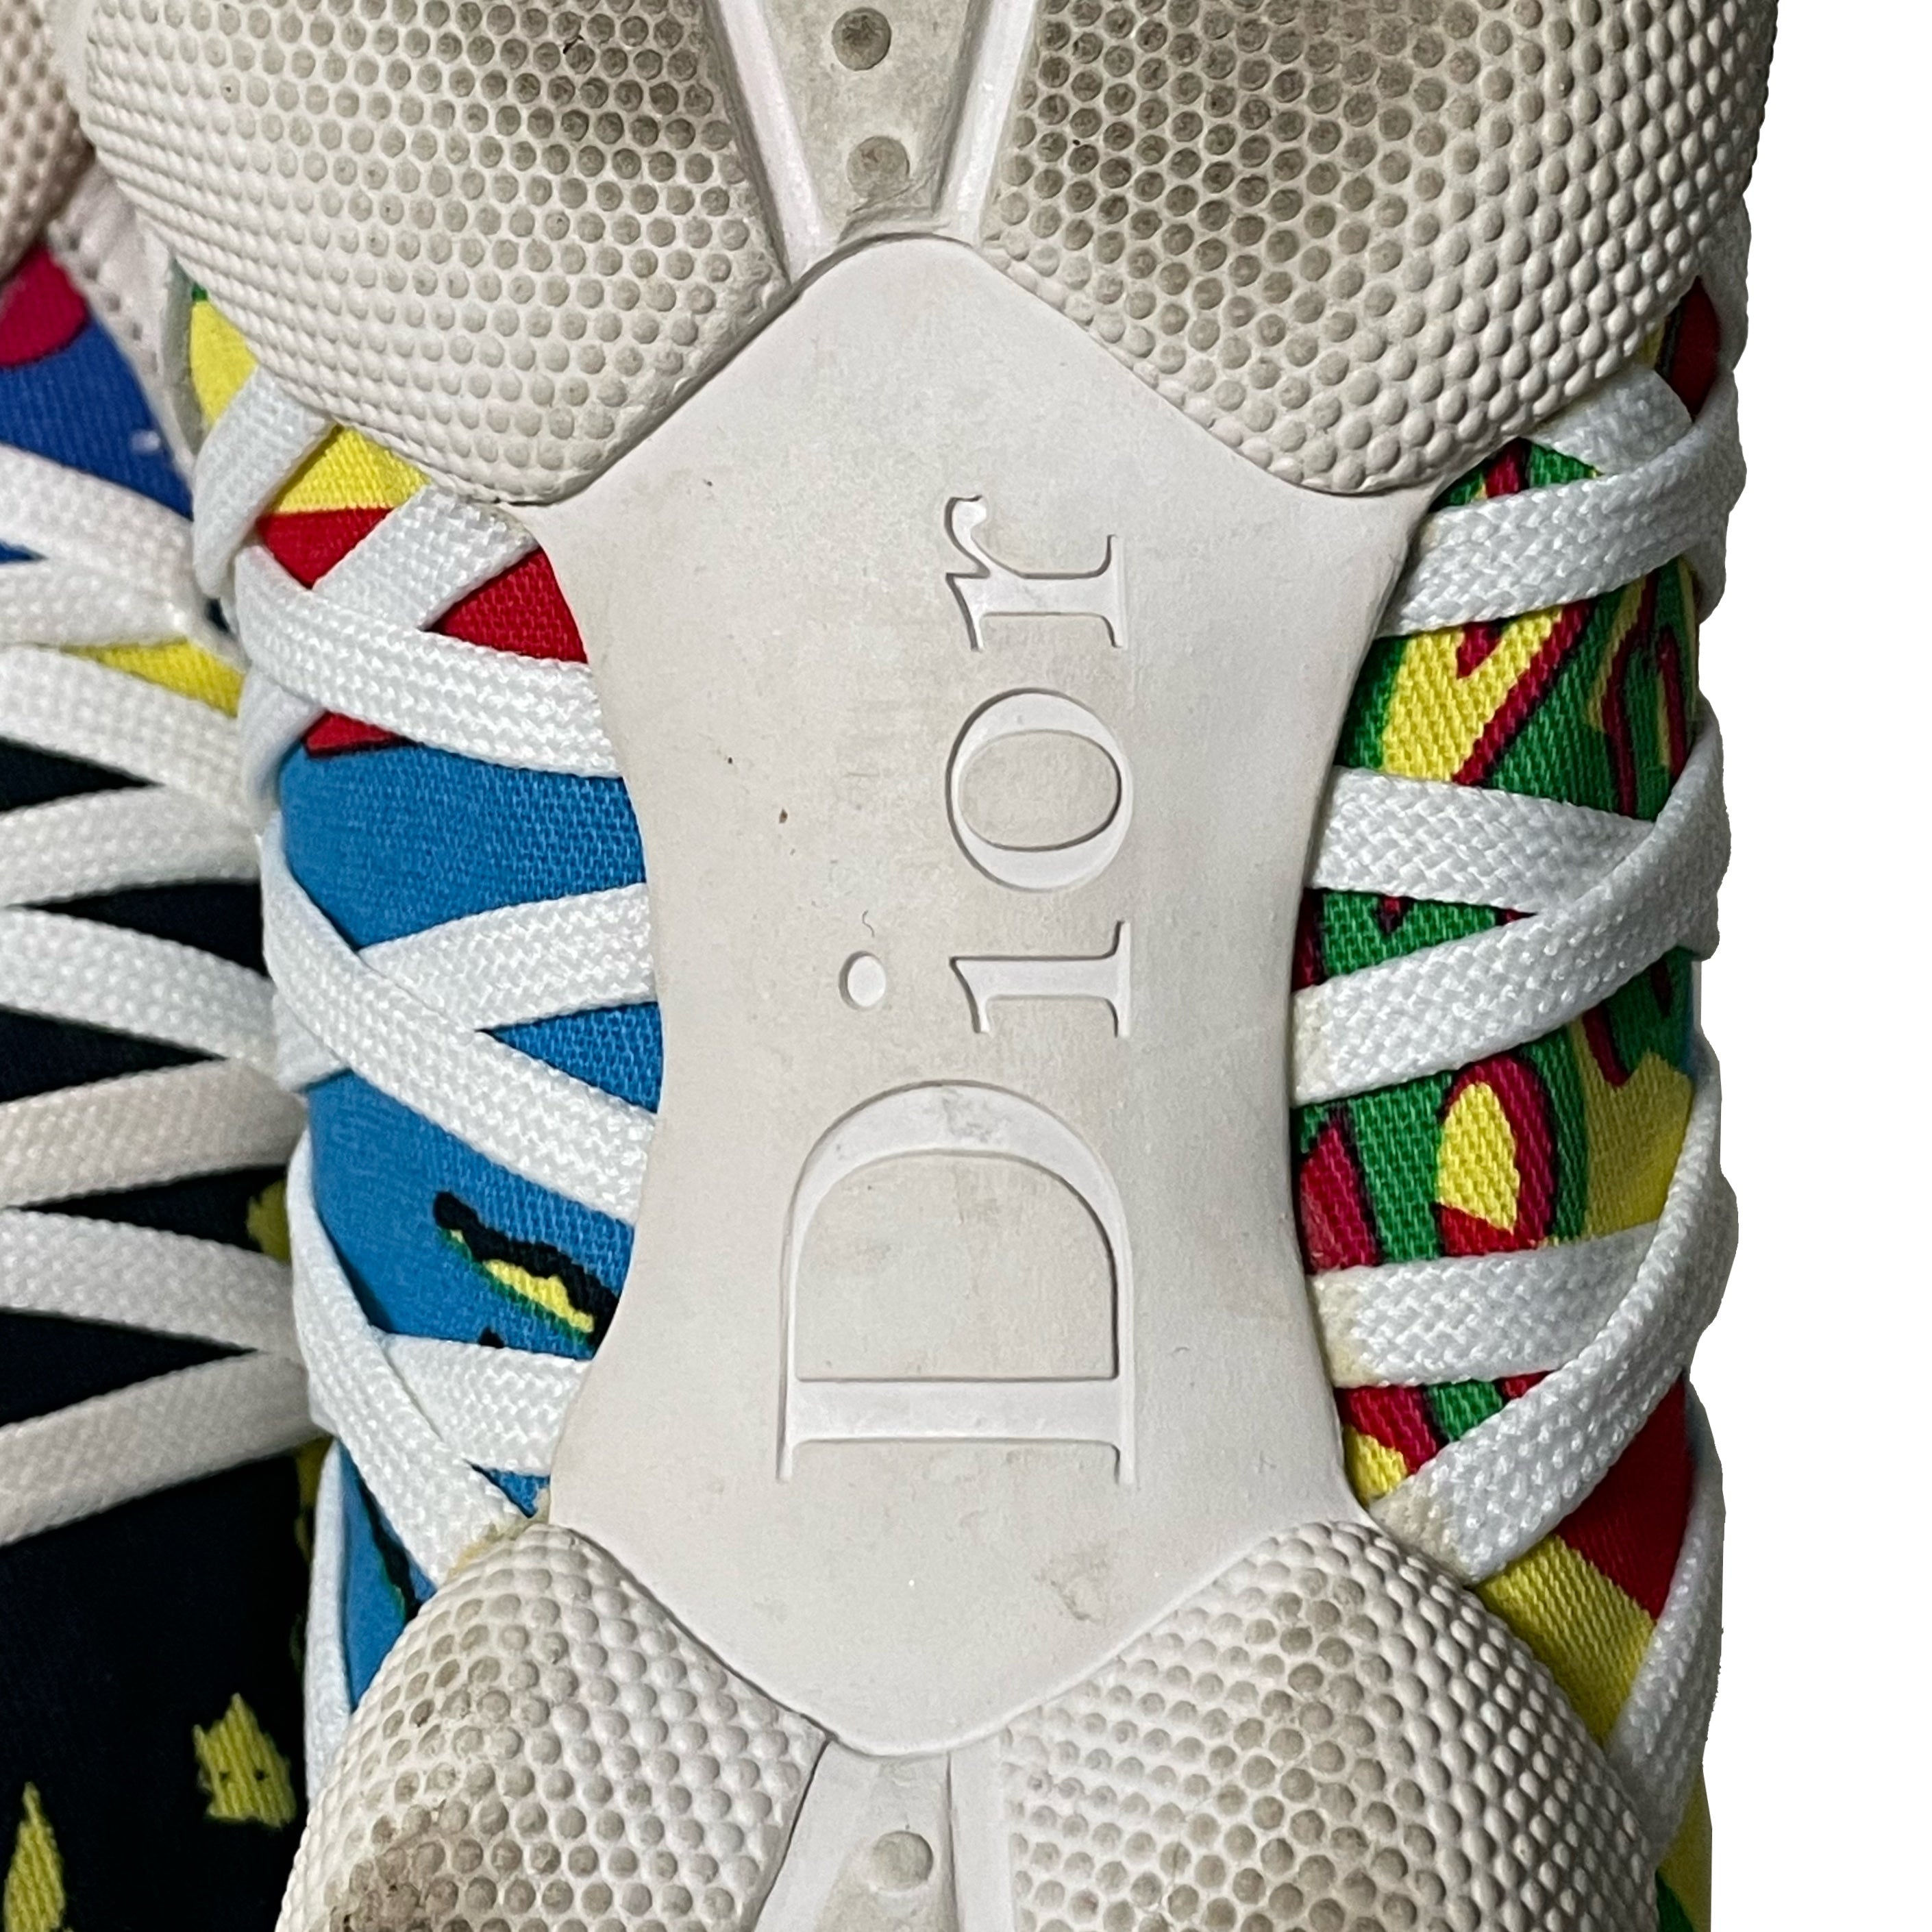 CHRISTIAN DIOR Fall Winter 2003 Rasta Mania Laced Up Sneakers - 5